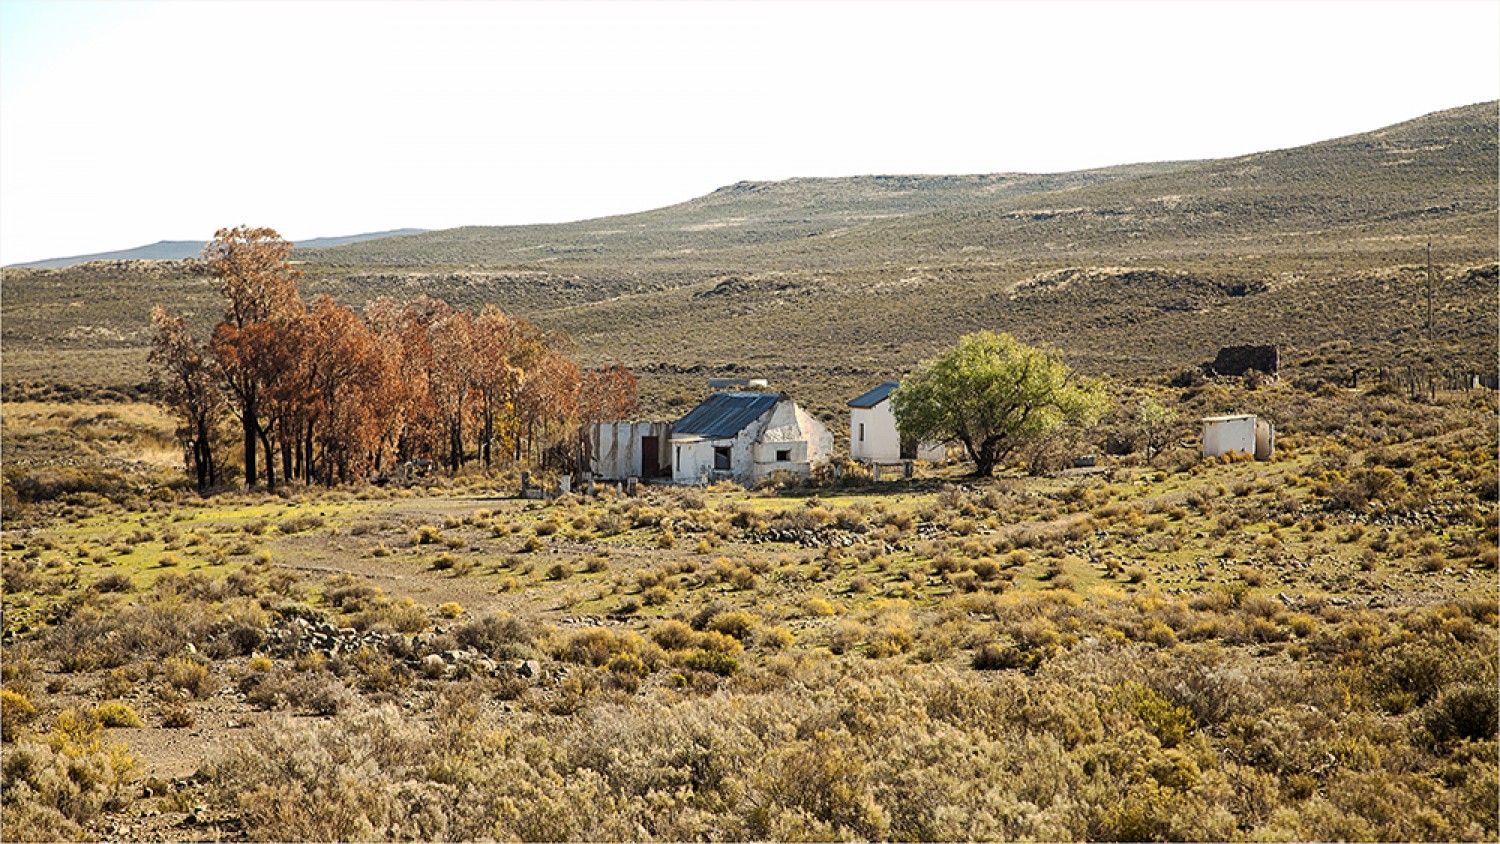 Courting Candles And Dirt Roads In The Karoo